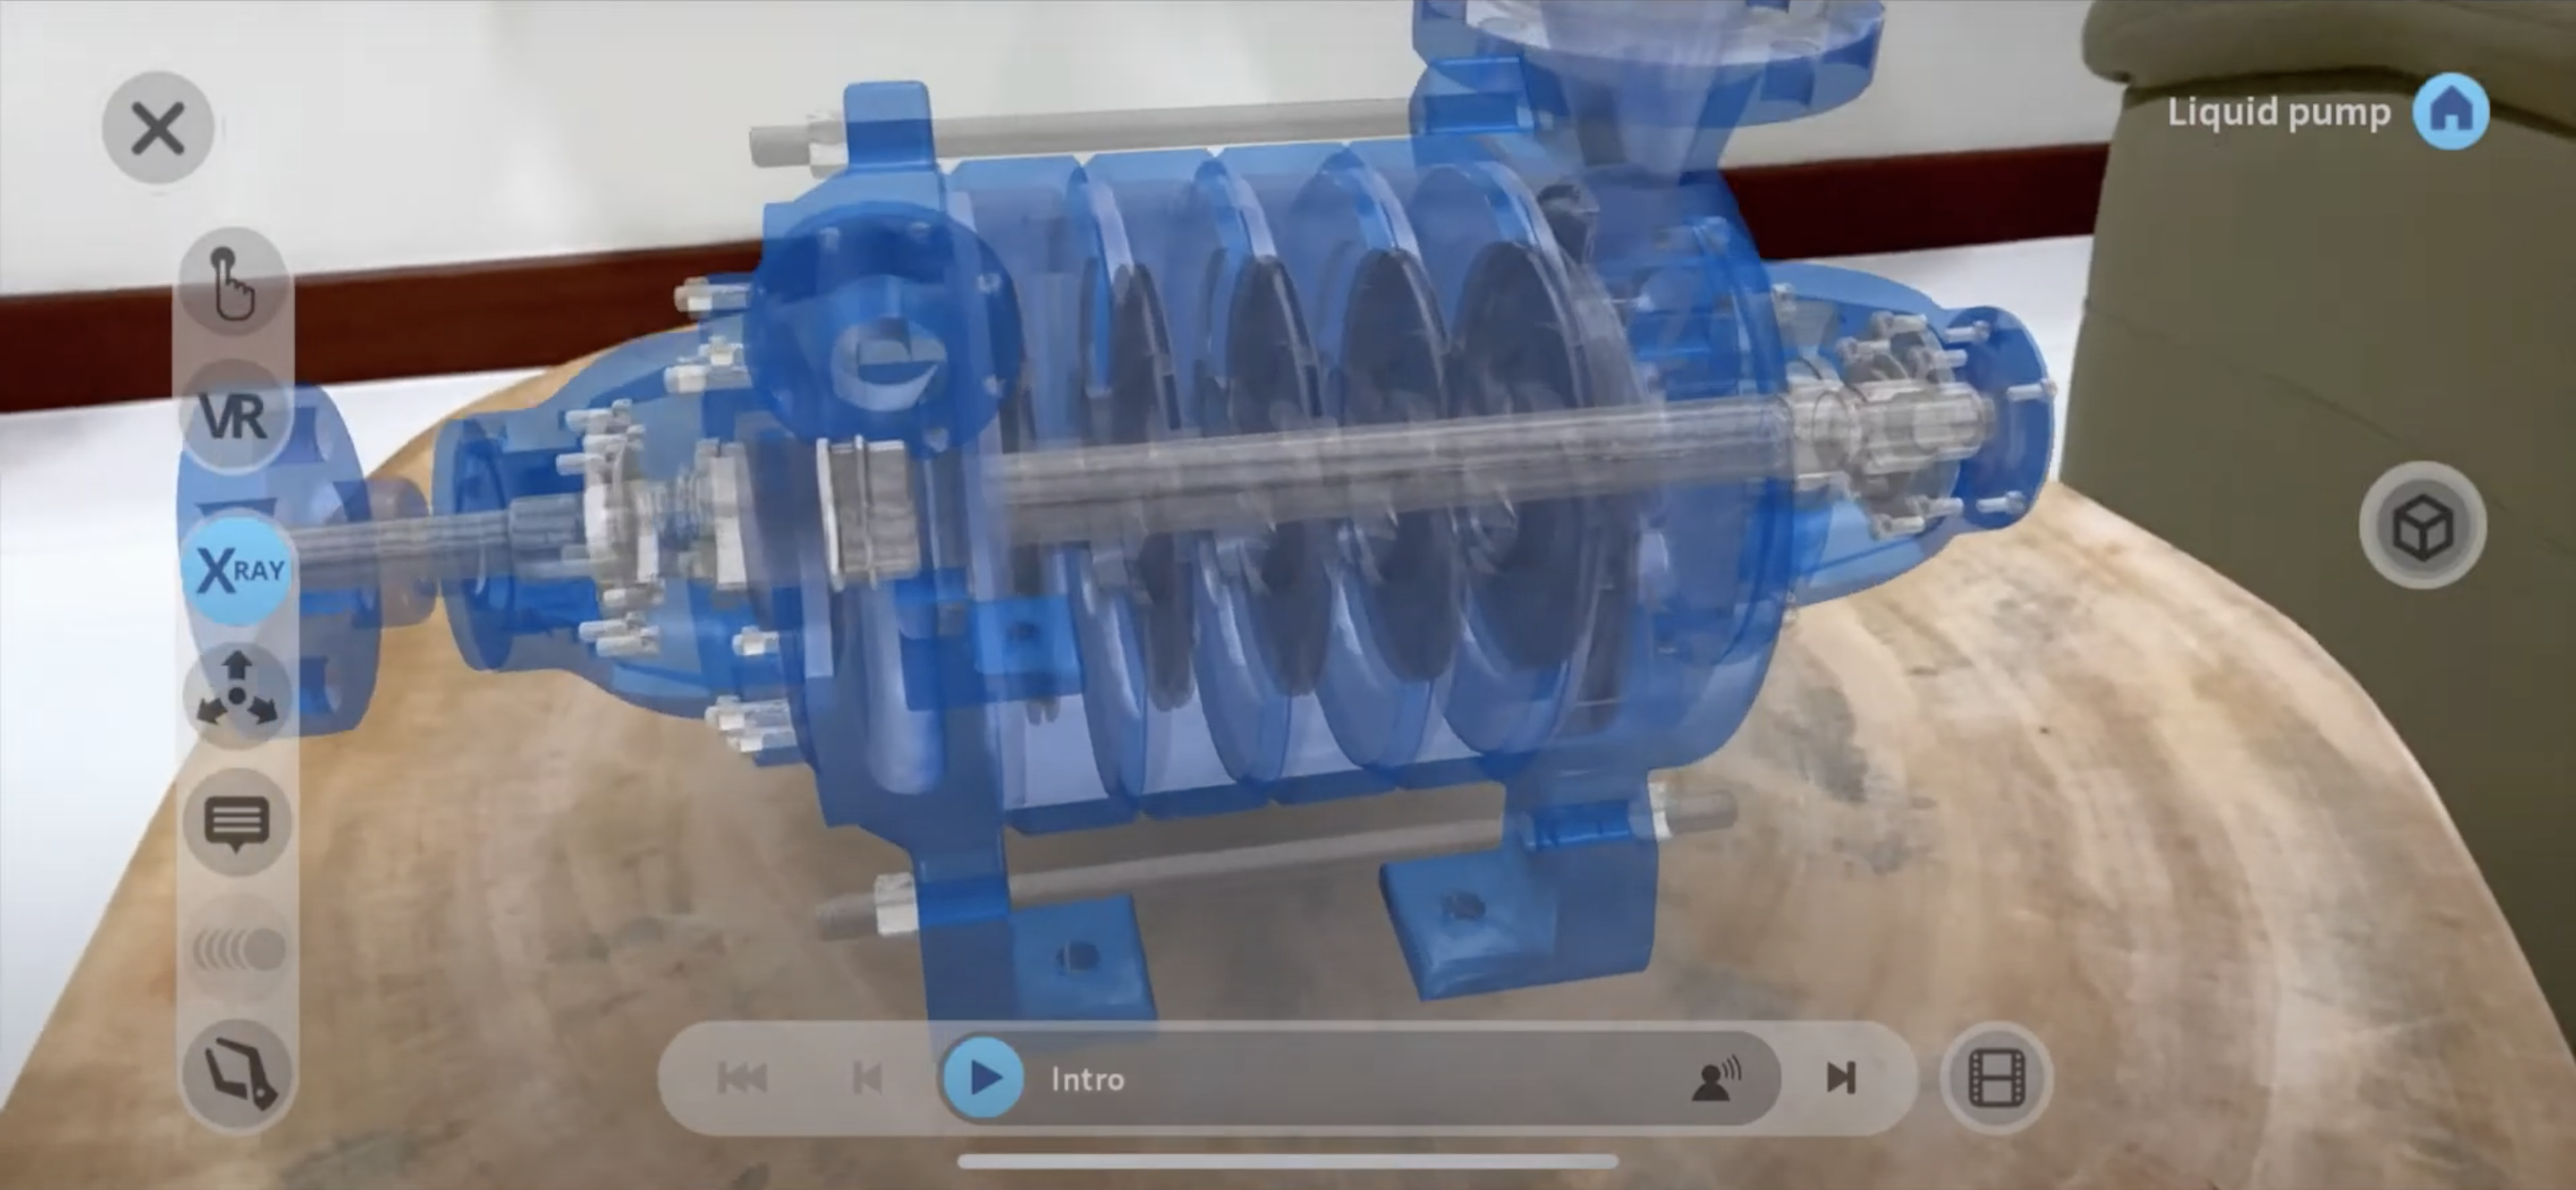 Understanding the Centrifugal Pump in AR and VR - EON Reality